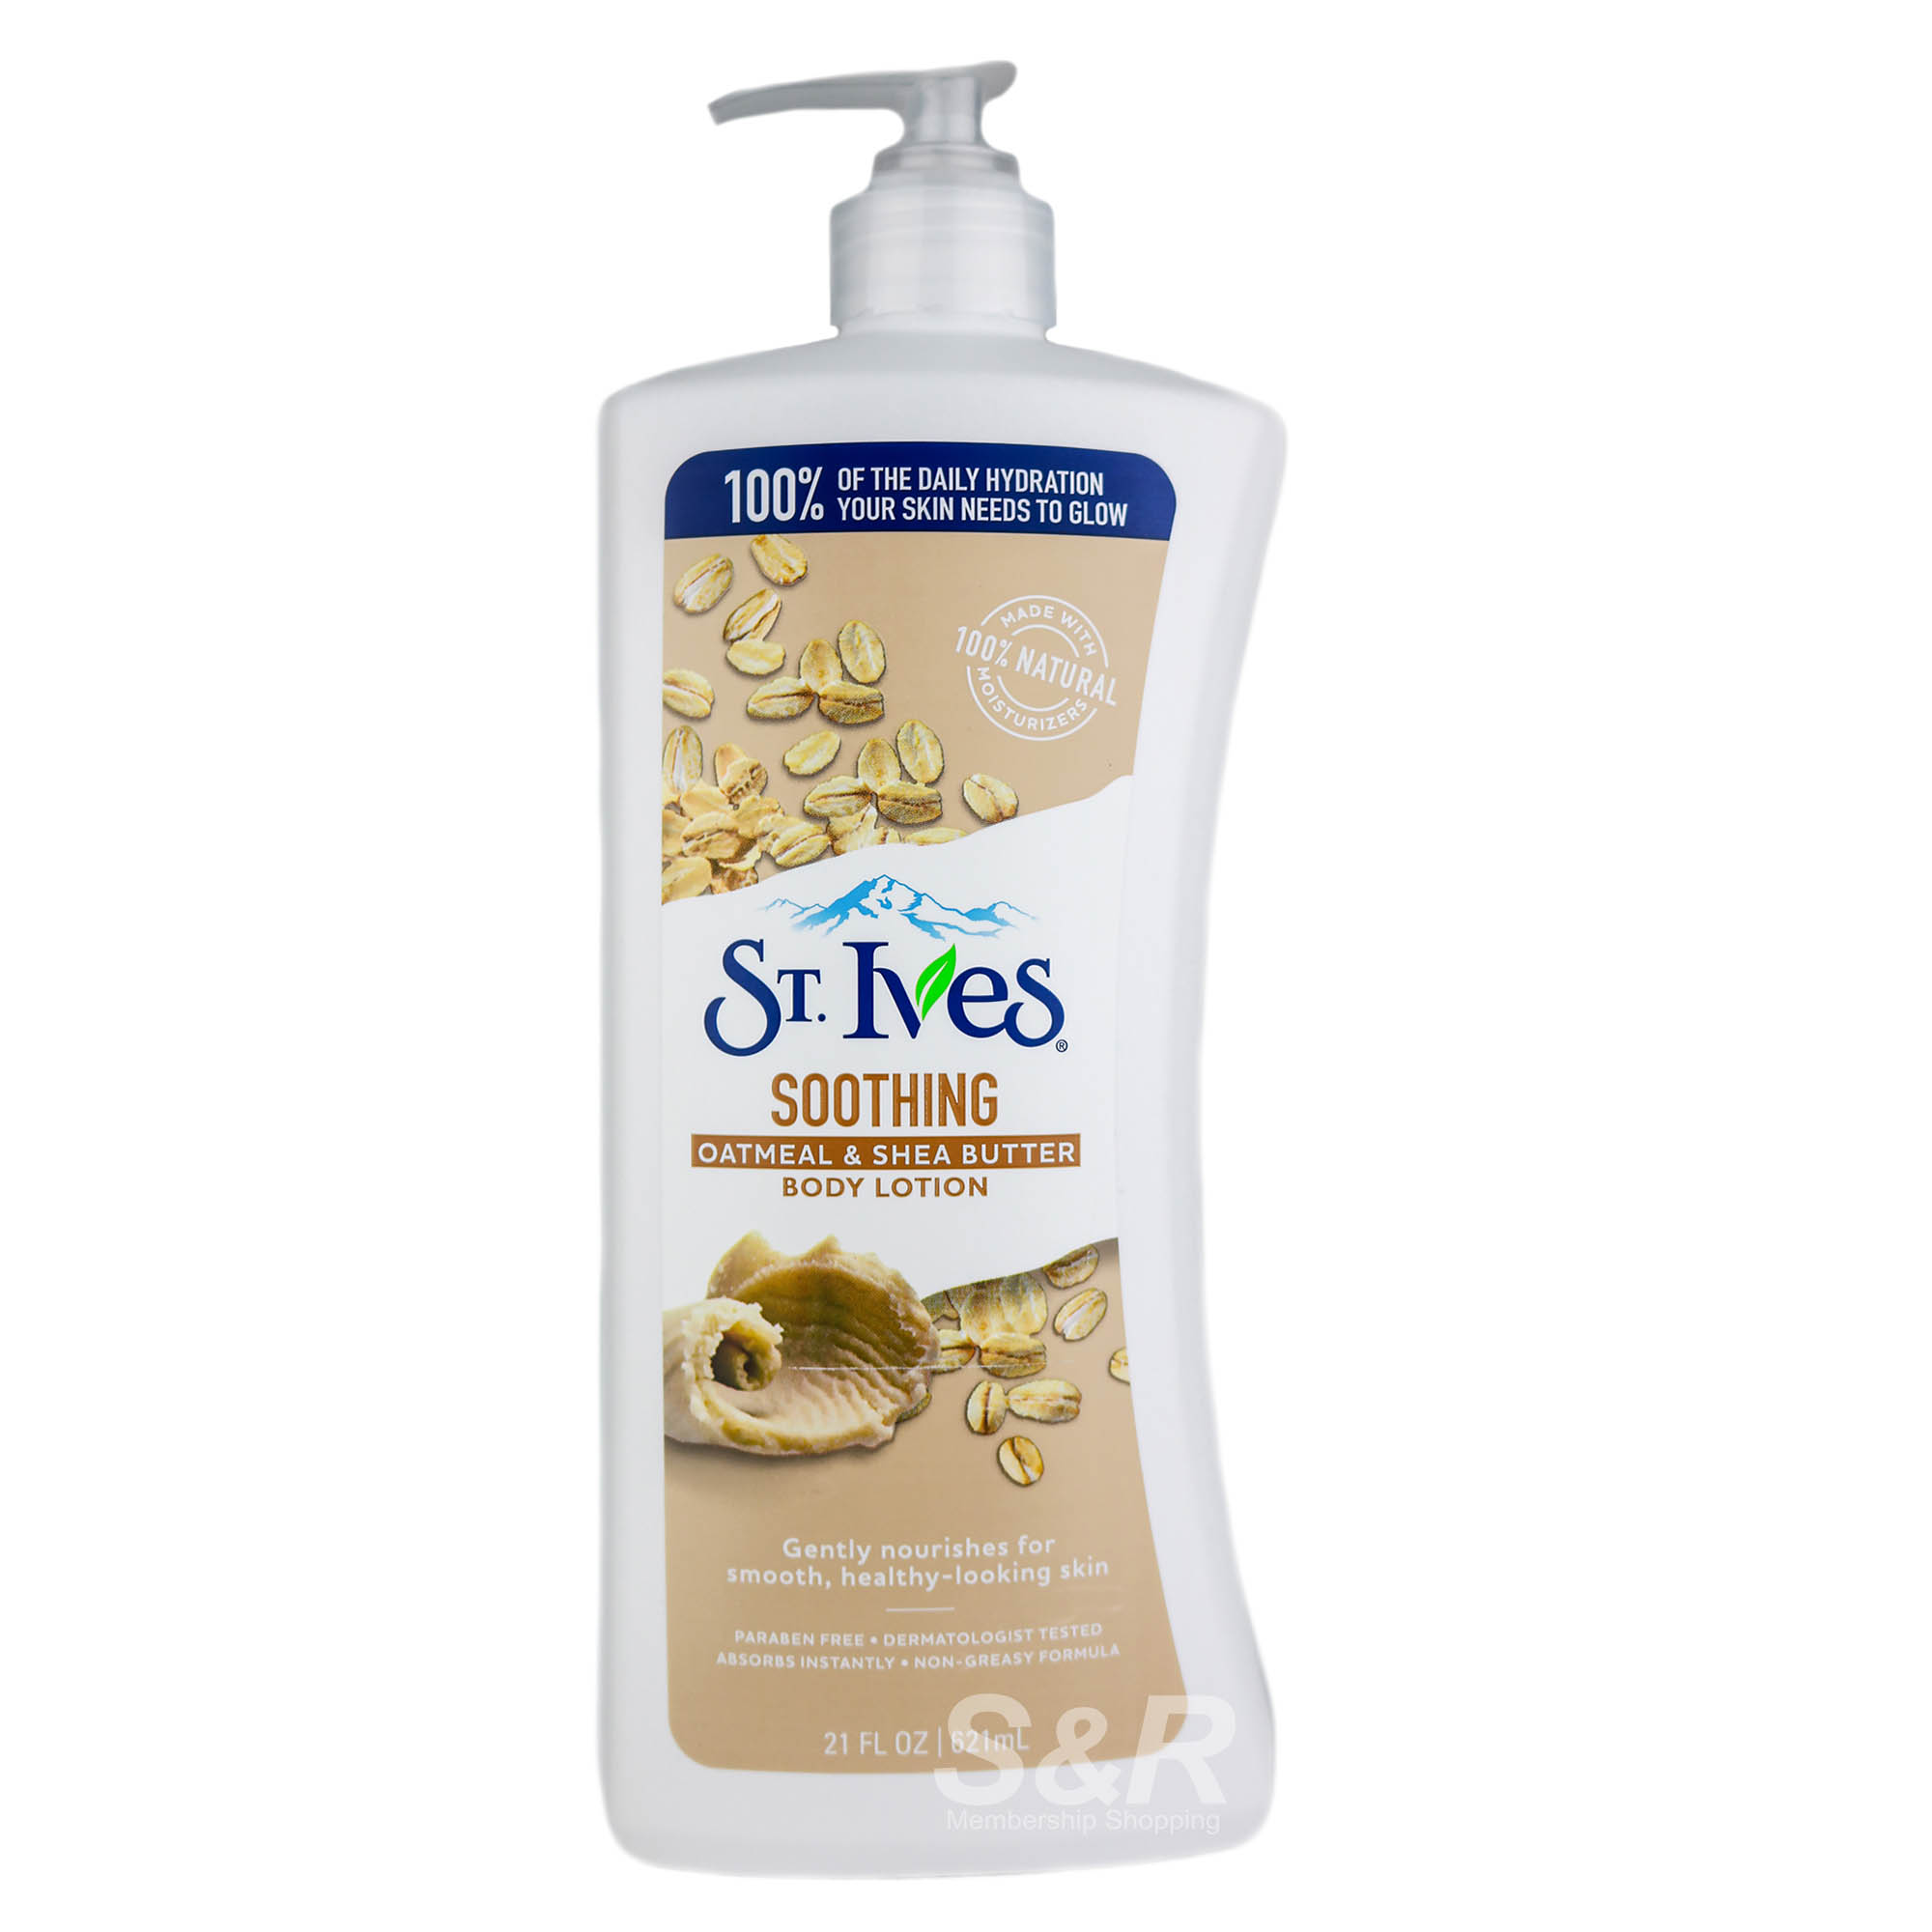 St. Ives Soothing Body Lotion with Oatmeal and Shea Butter 621mL